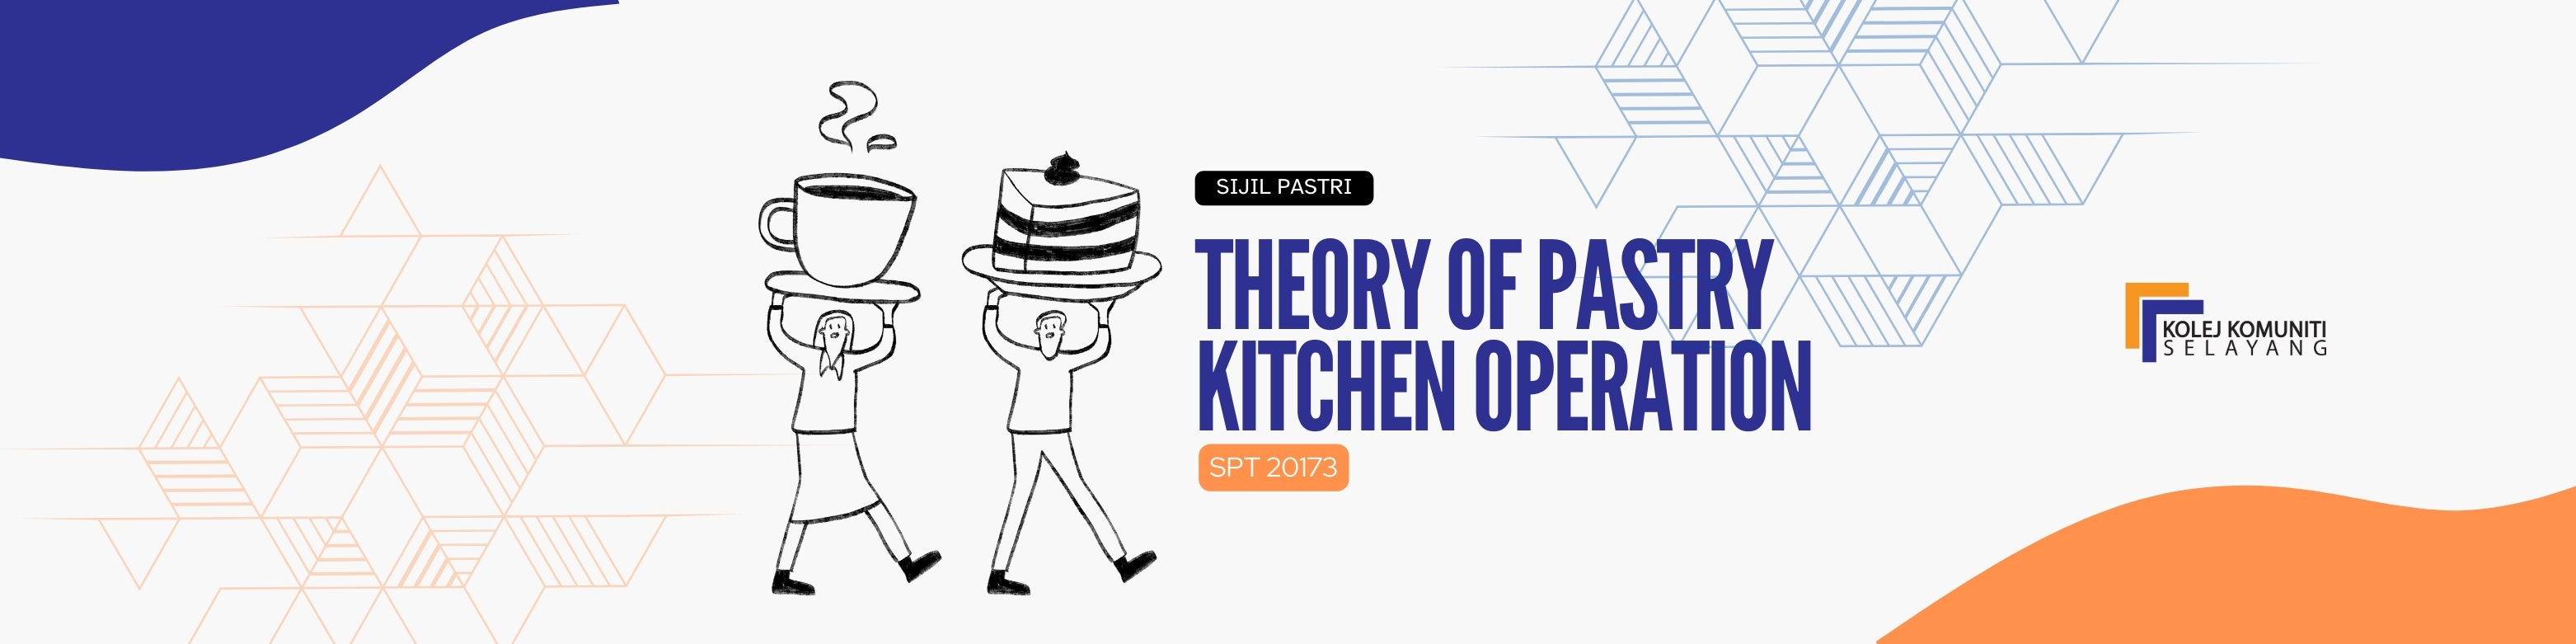 SPT20173 - THEORY OF PASTRY KITCHEN OPERATION